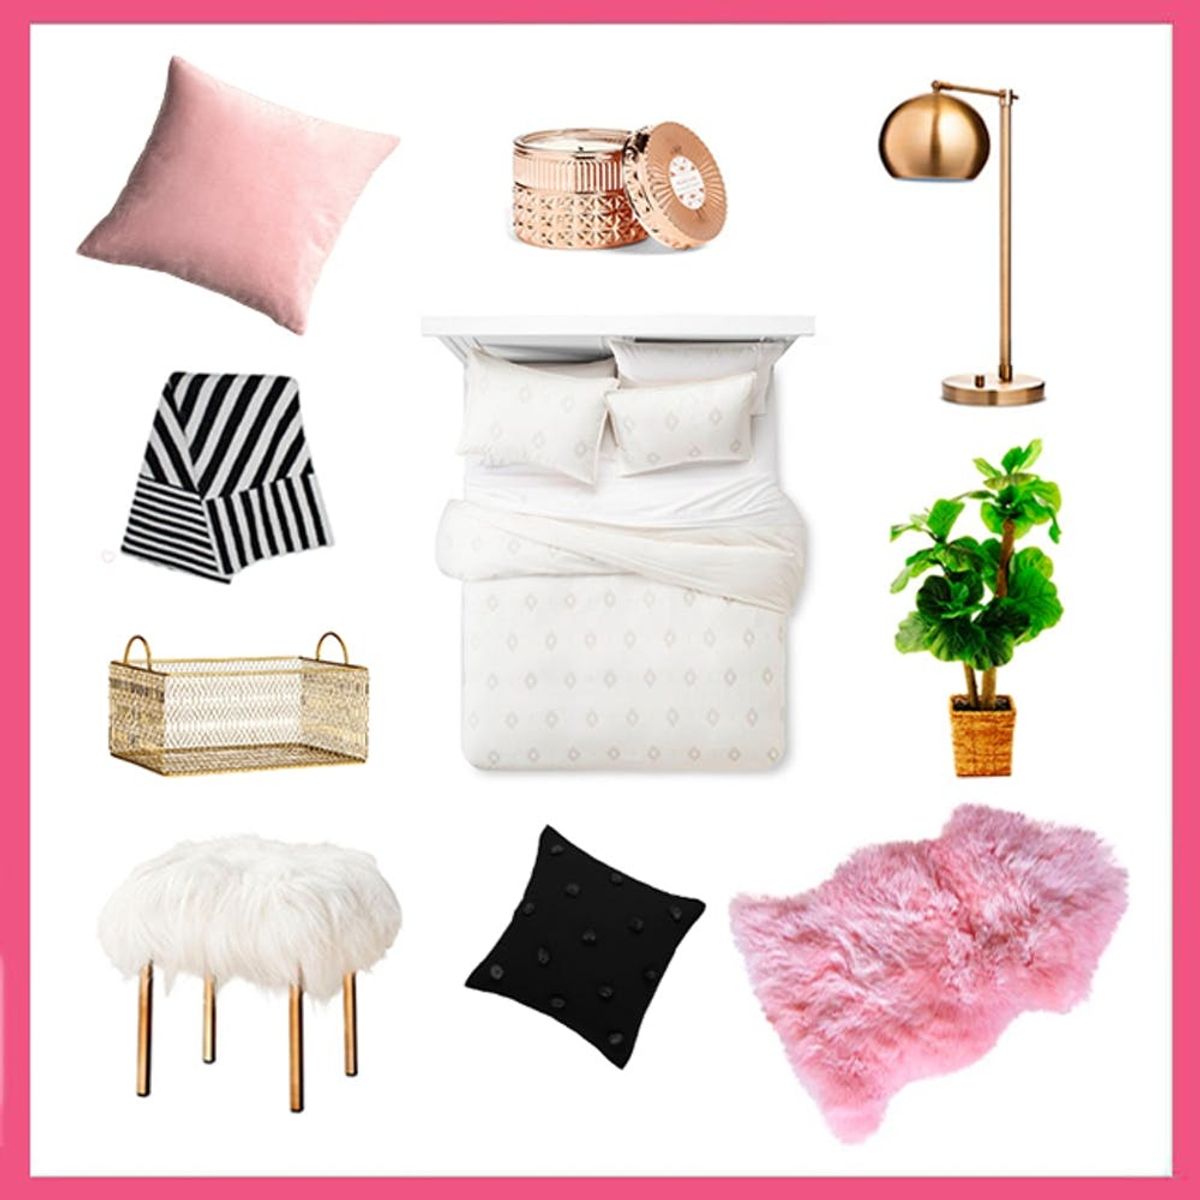 3 Ways to Cozy Up Your Bedroom for Colder Weather